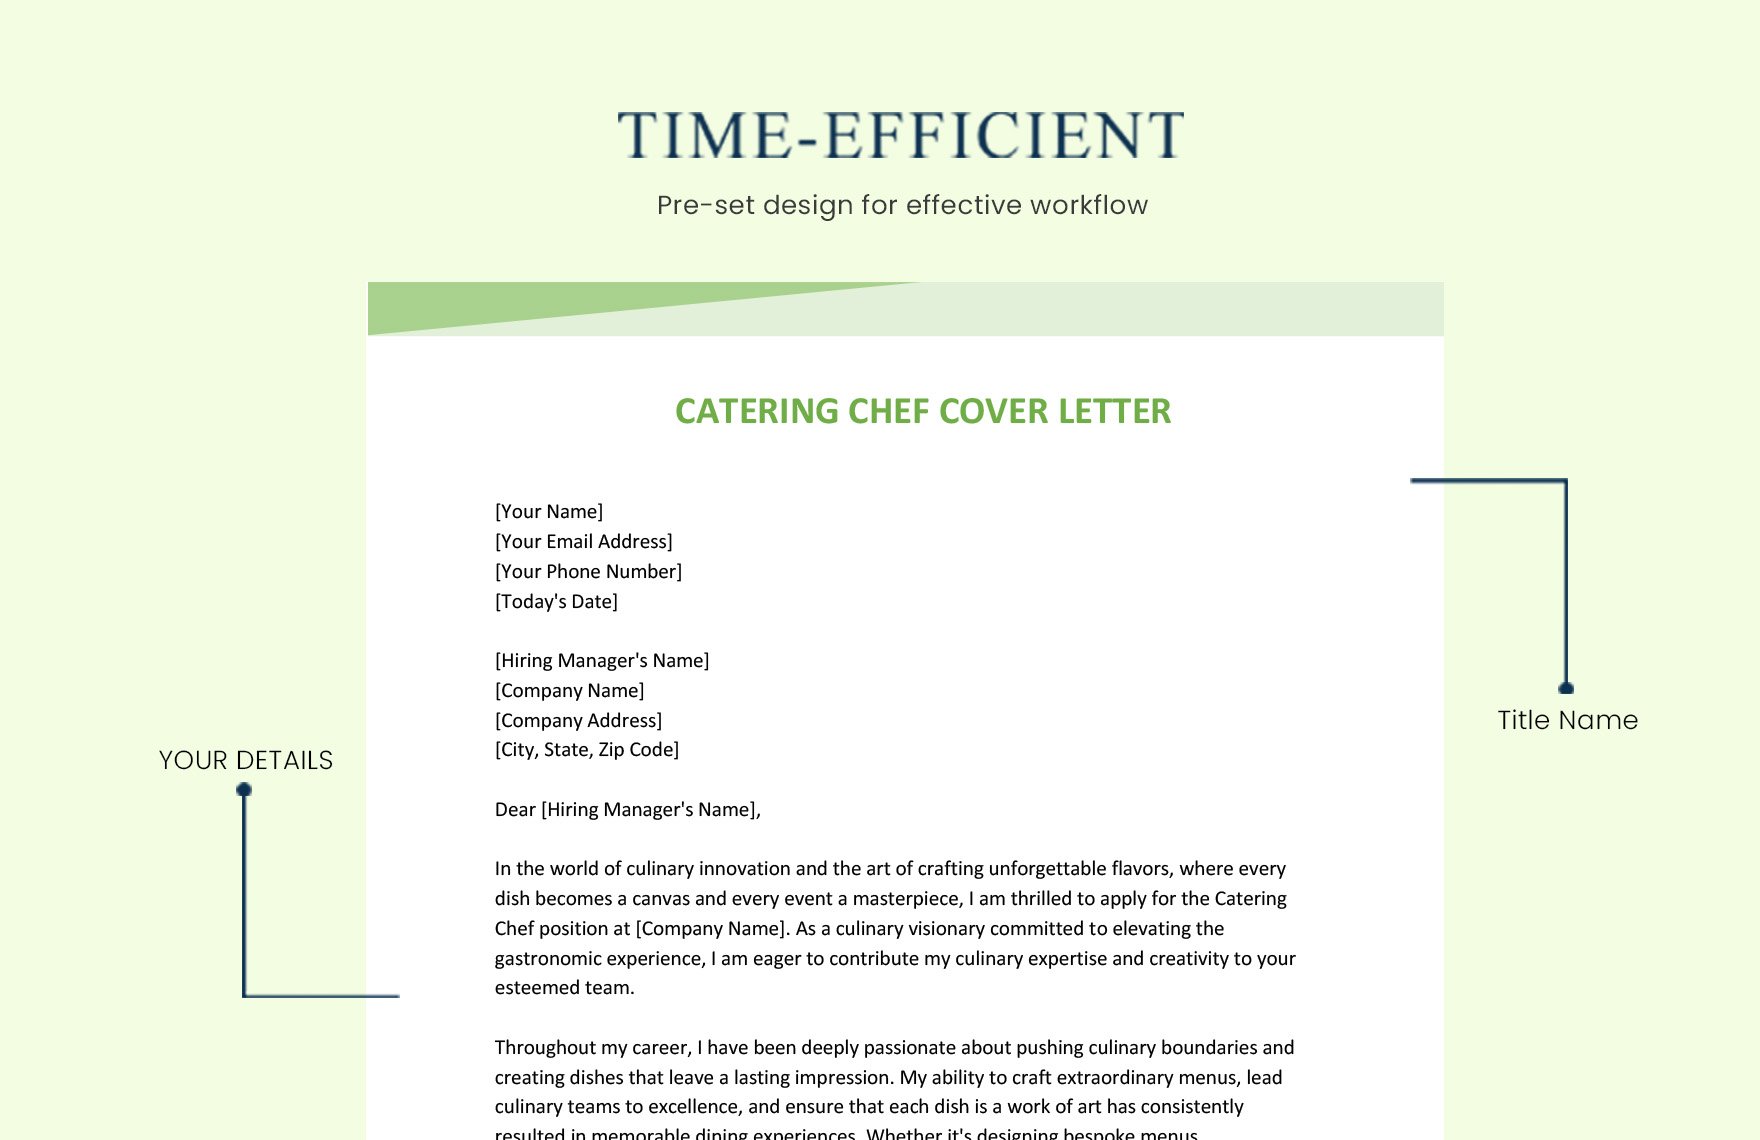 Catering Chef Cover Letter